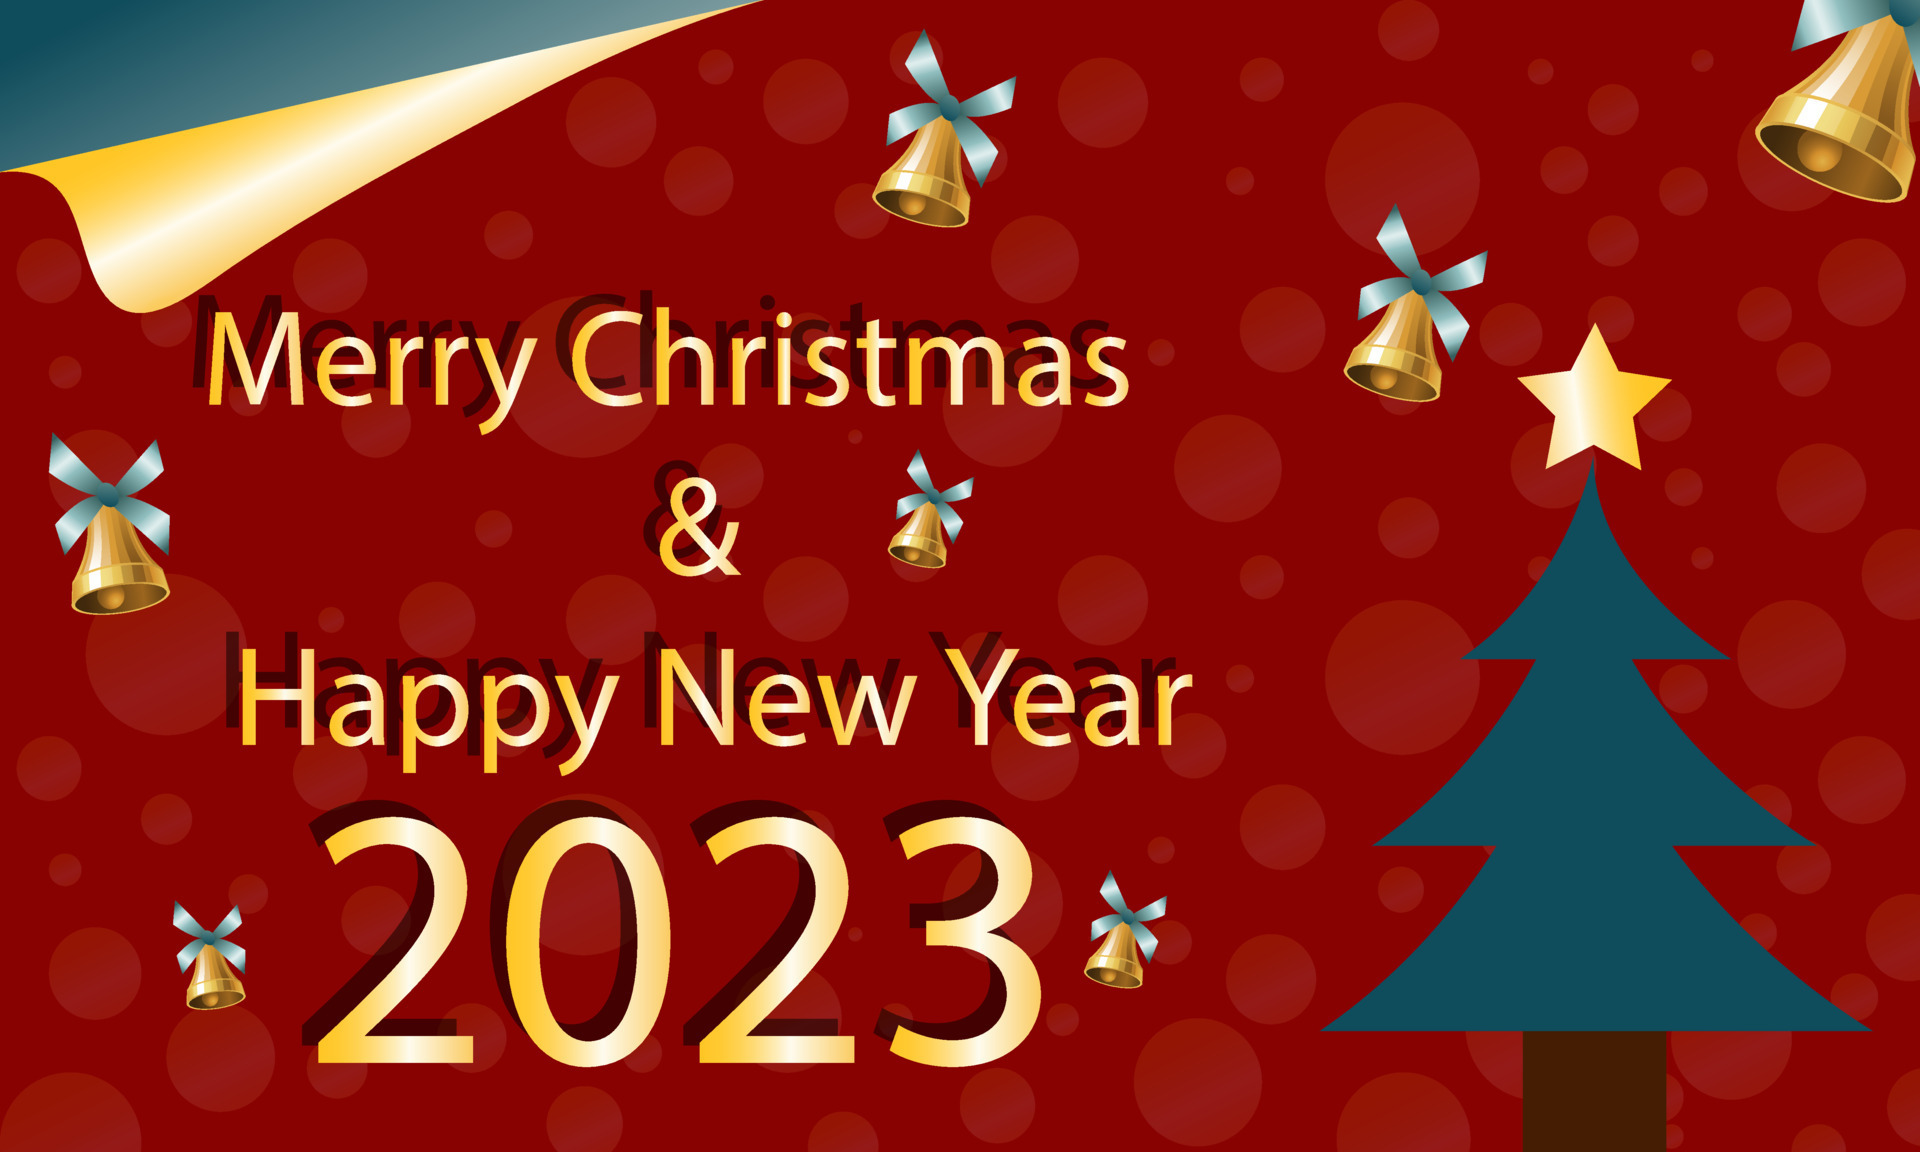 Celebrating Merry Christmas and New Year 2023 Background Image that can be used for greeting cards and wallpaper. Illustration Stock Image